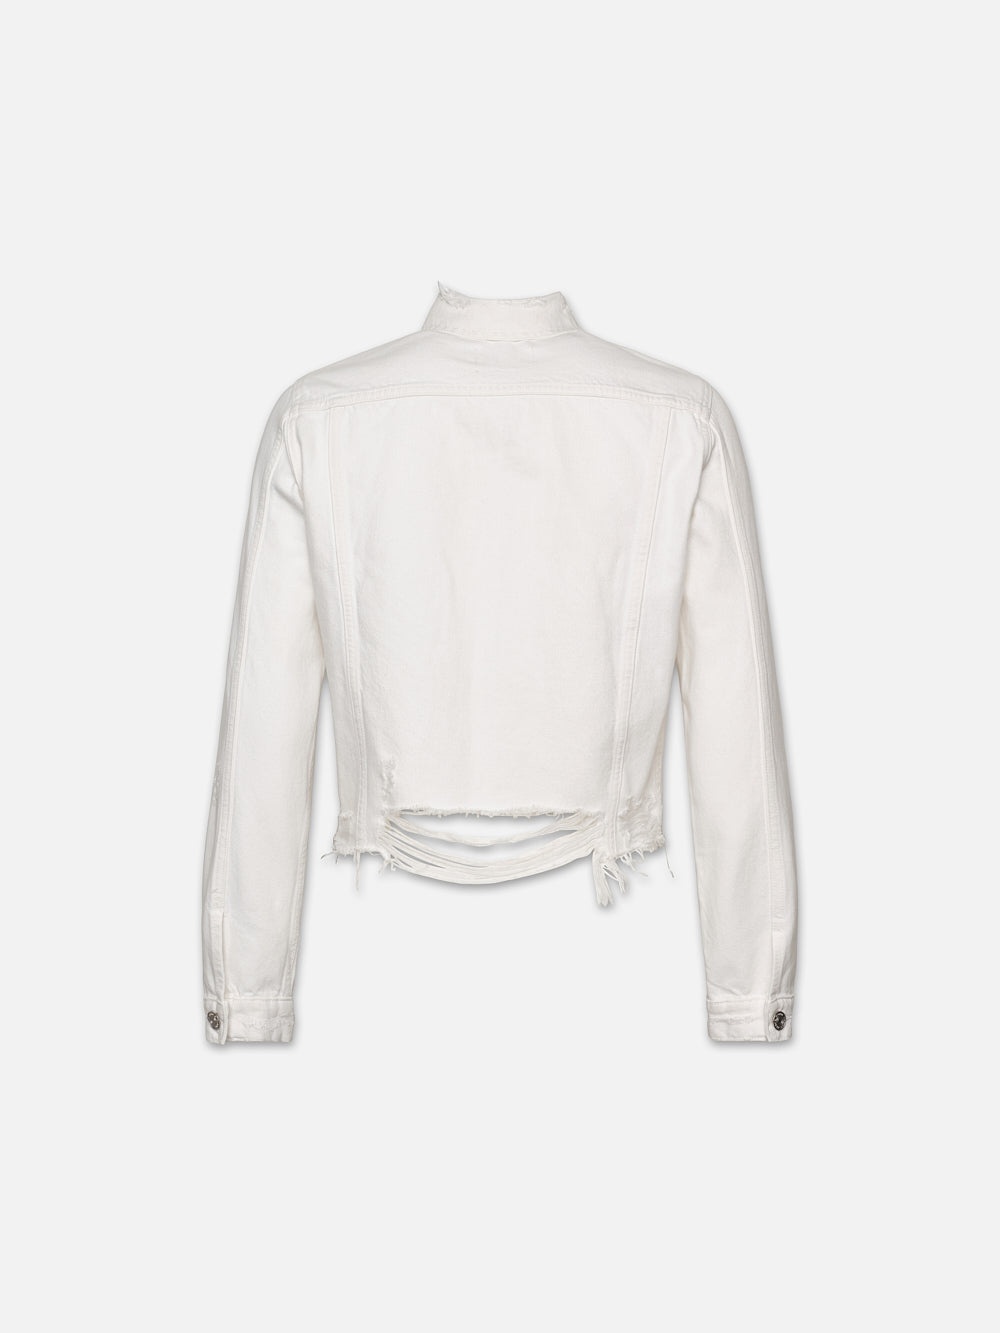 Le Vintage Jacket in White Rips - 3